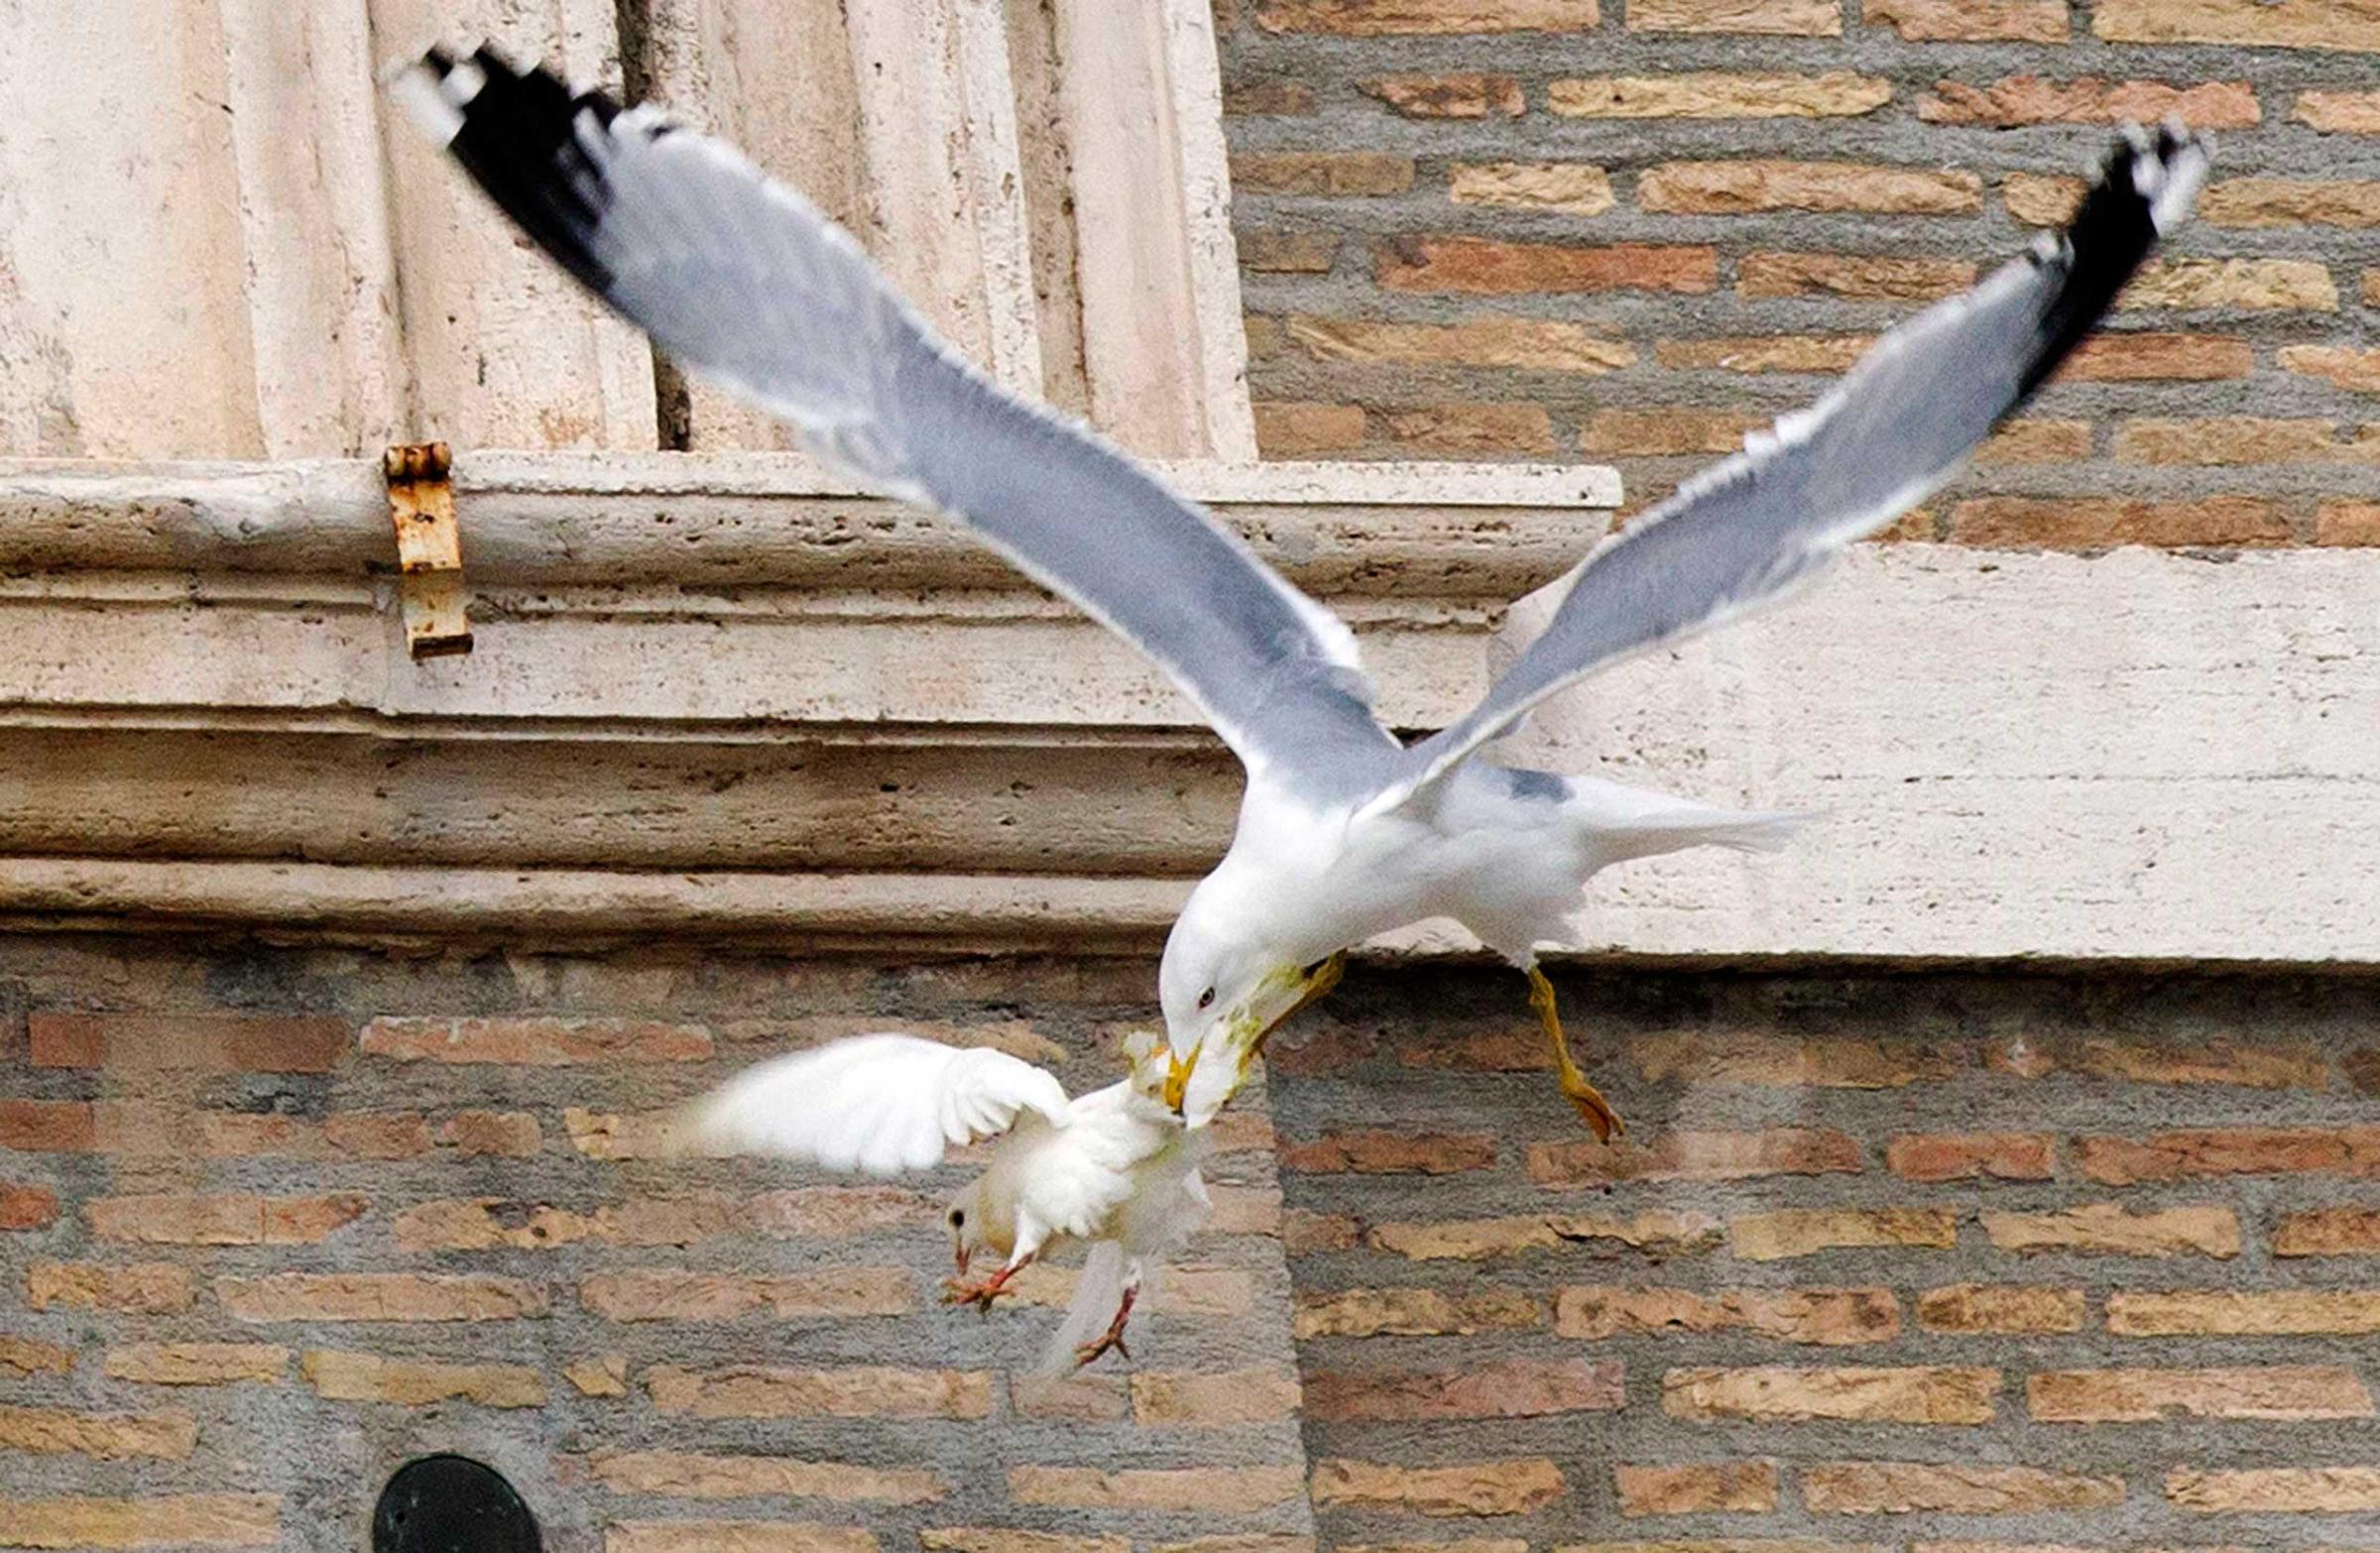 A dove released during an Angelus prayer conducted by Pope Francis, is attacked by a seagull in Saint Peter's square at the Vatican January 26, 2014.